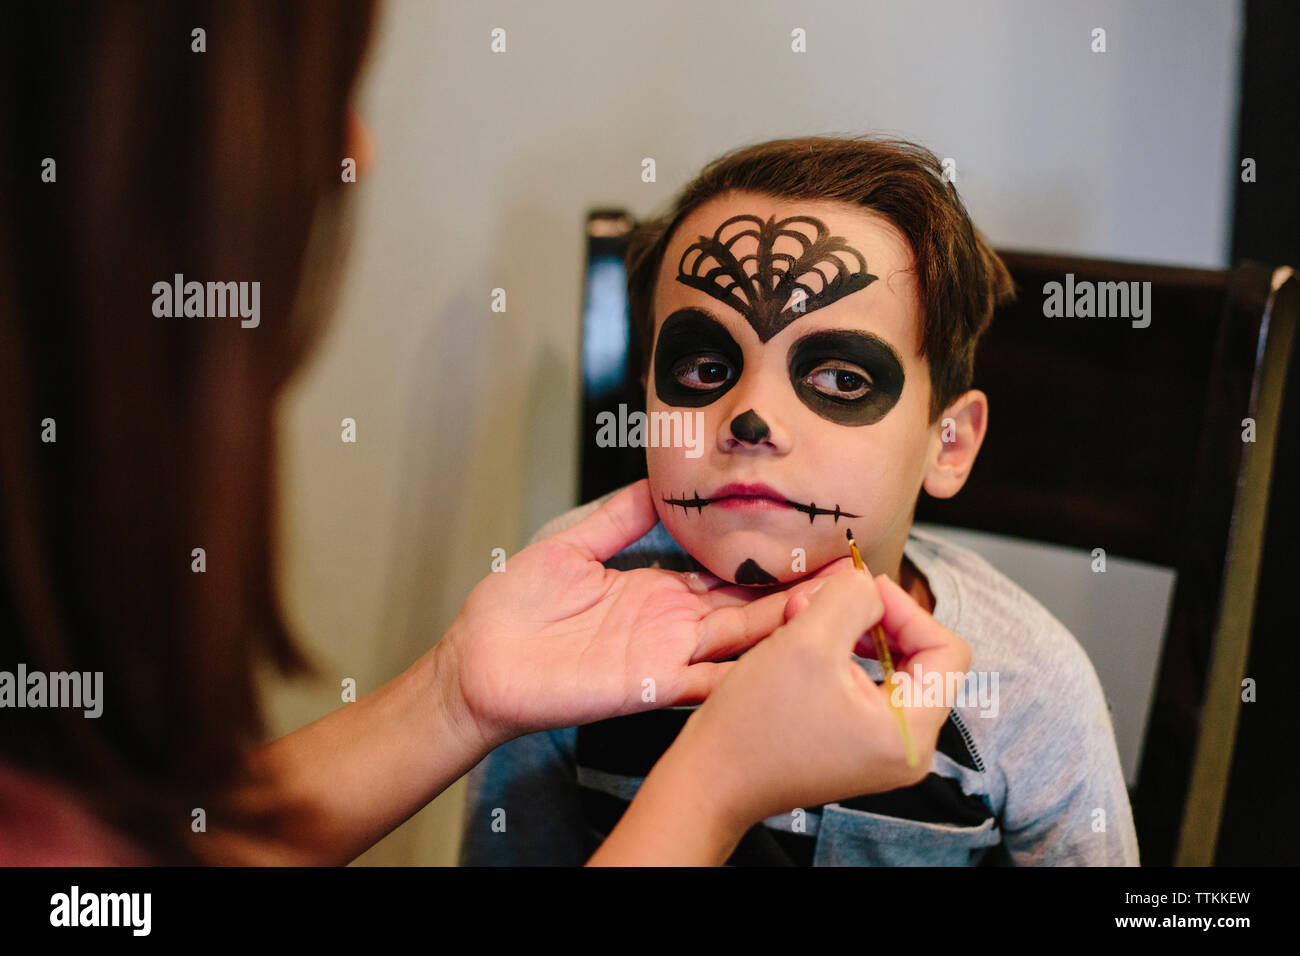 Mother applying make-up on son's face at home Stock Photo